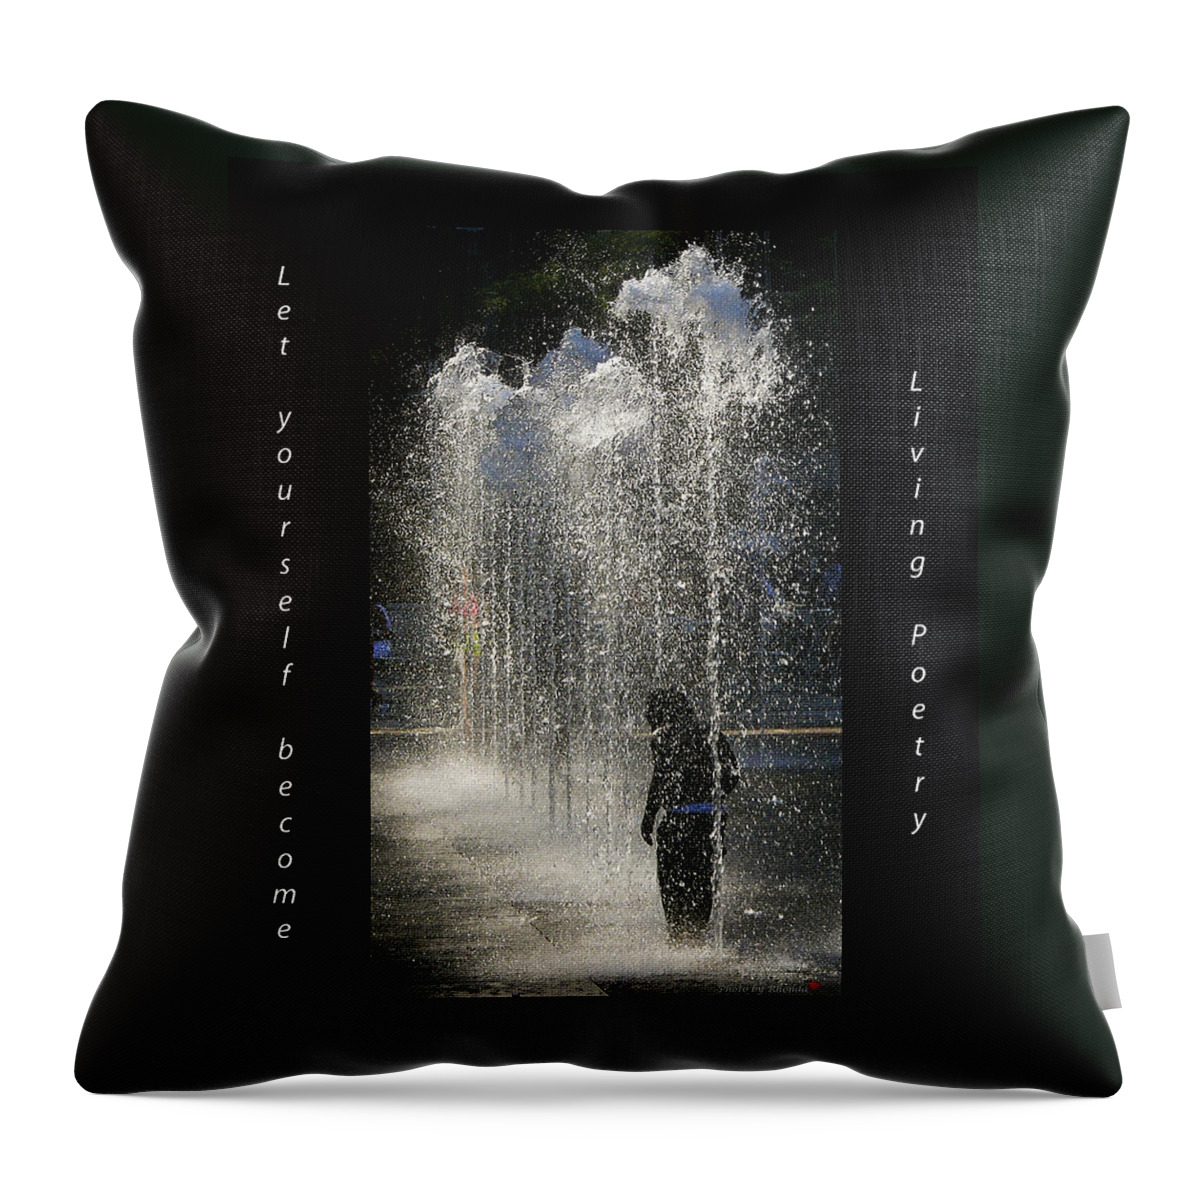 Still Life Throw Pillow featuring the photograph In His Own World by Rhonda McDougall